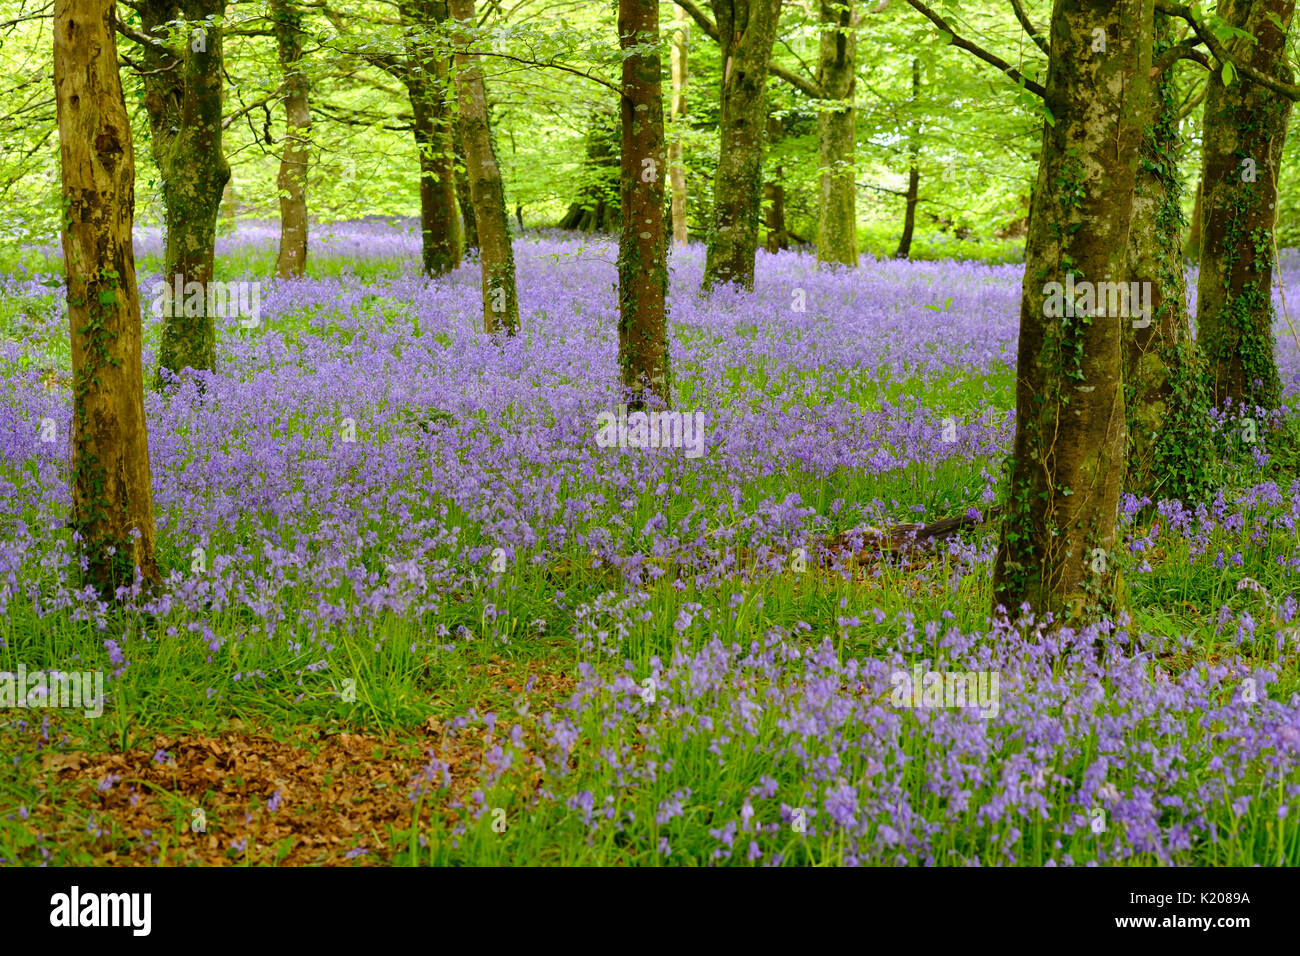 Blossoms of Common bluebell (Hyacinthoides non-scripta) in the forest, near Bodmin, Cornwall, England, United Kingdom Stock Photo